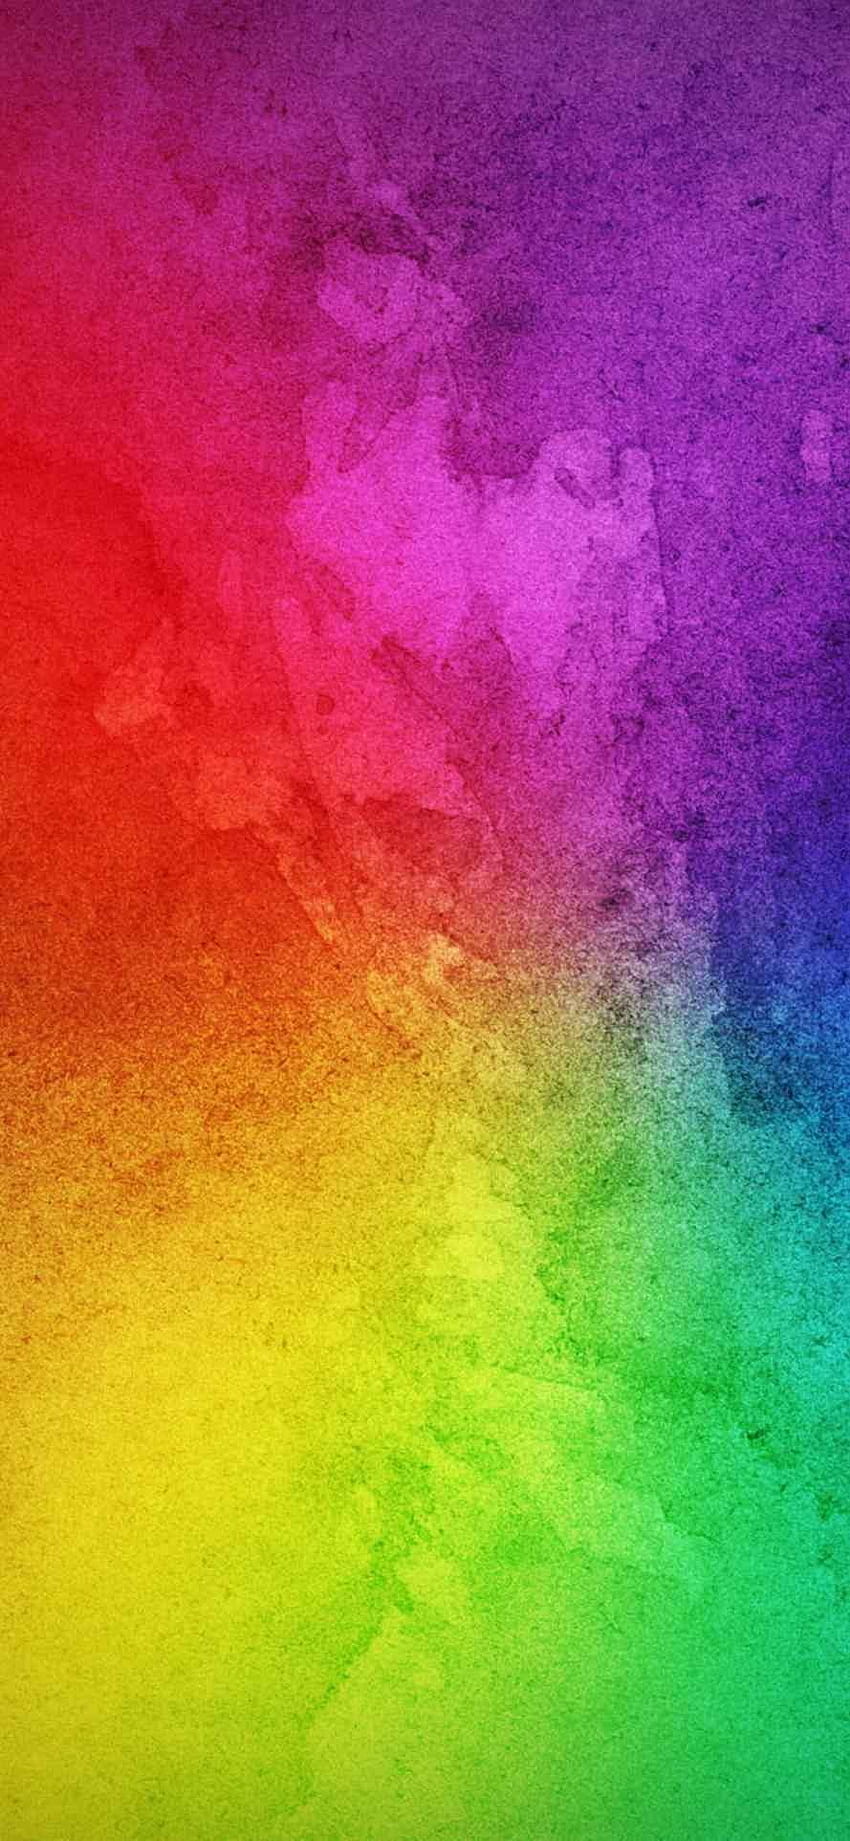 Green, Red, Purple, Pink, Yellow, Violet, Iphone, red and yellow iphone HD phone wallpaper